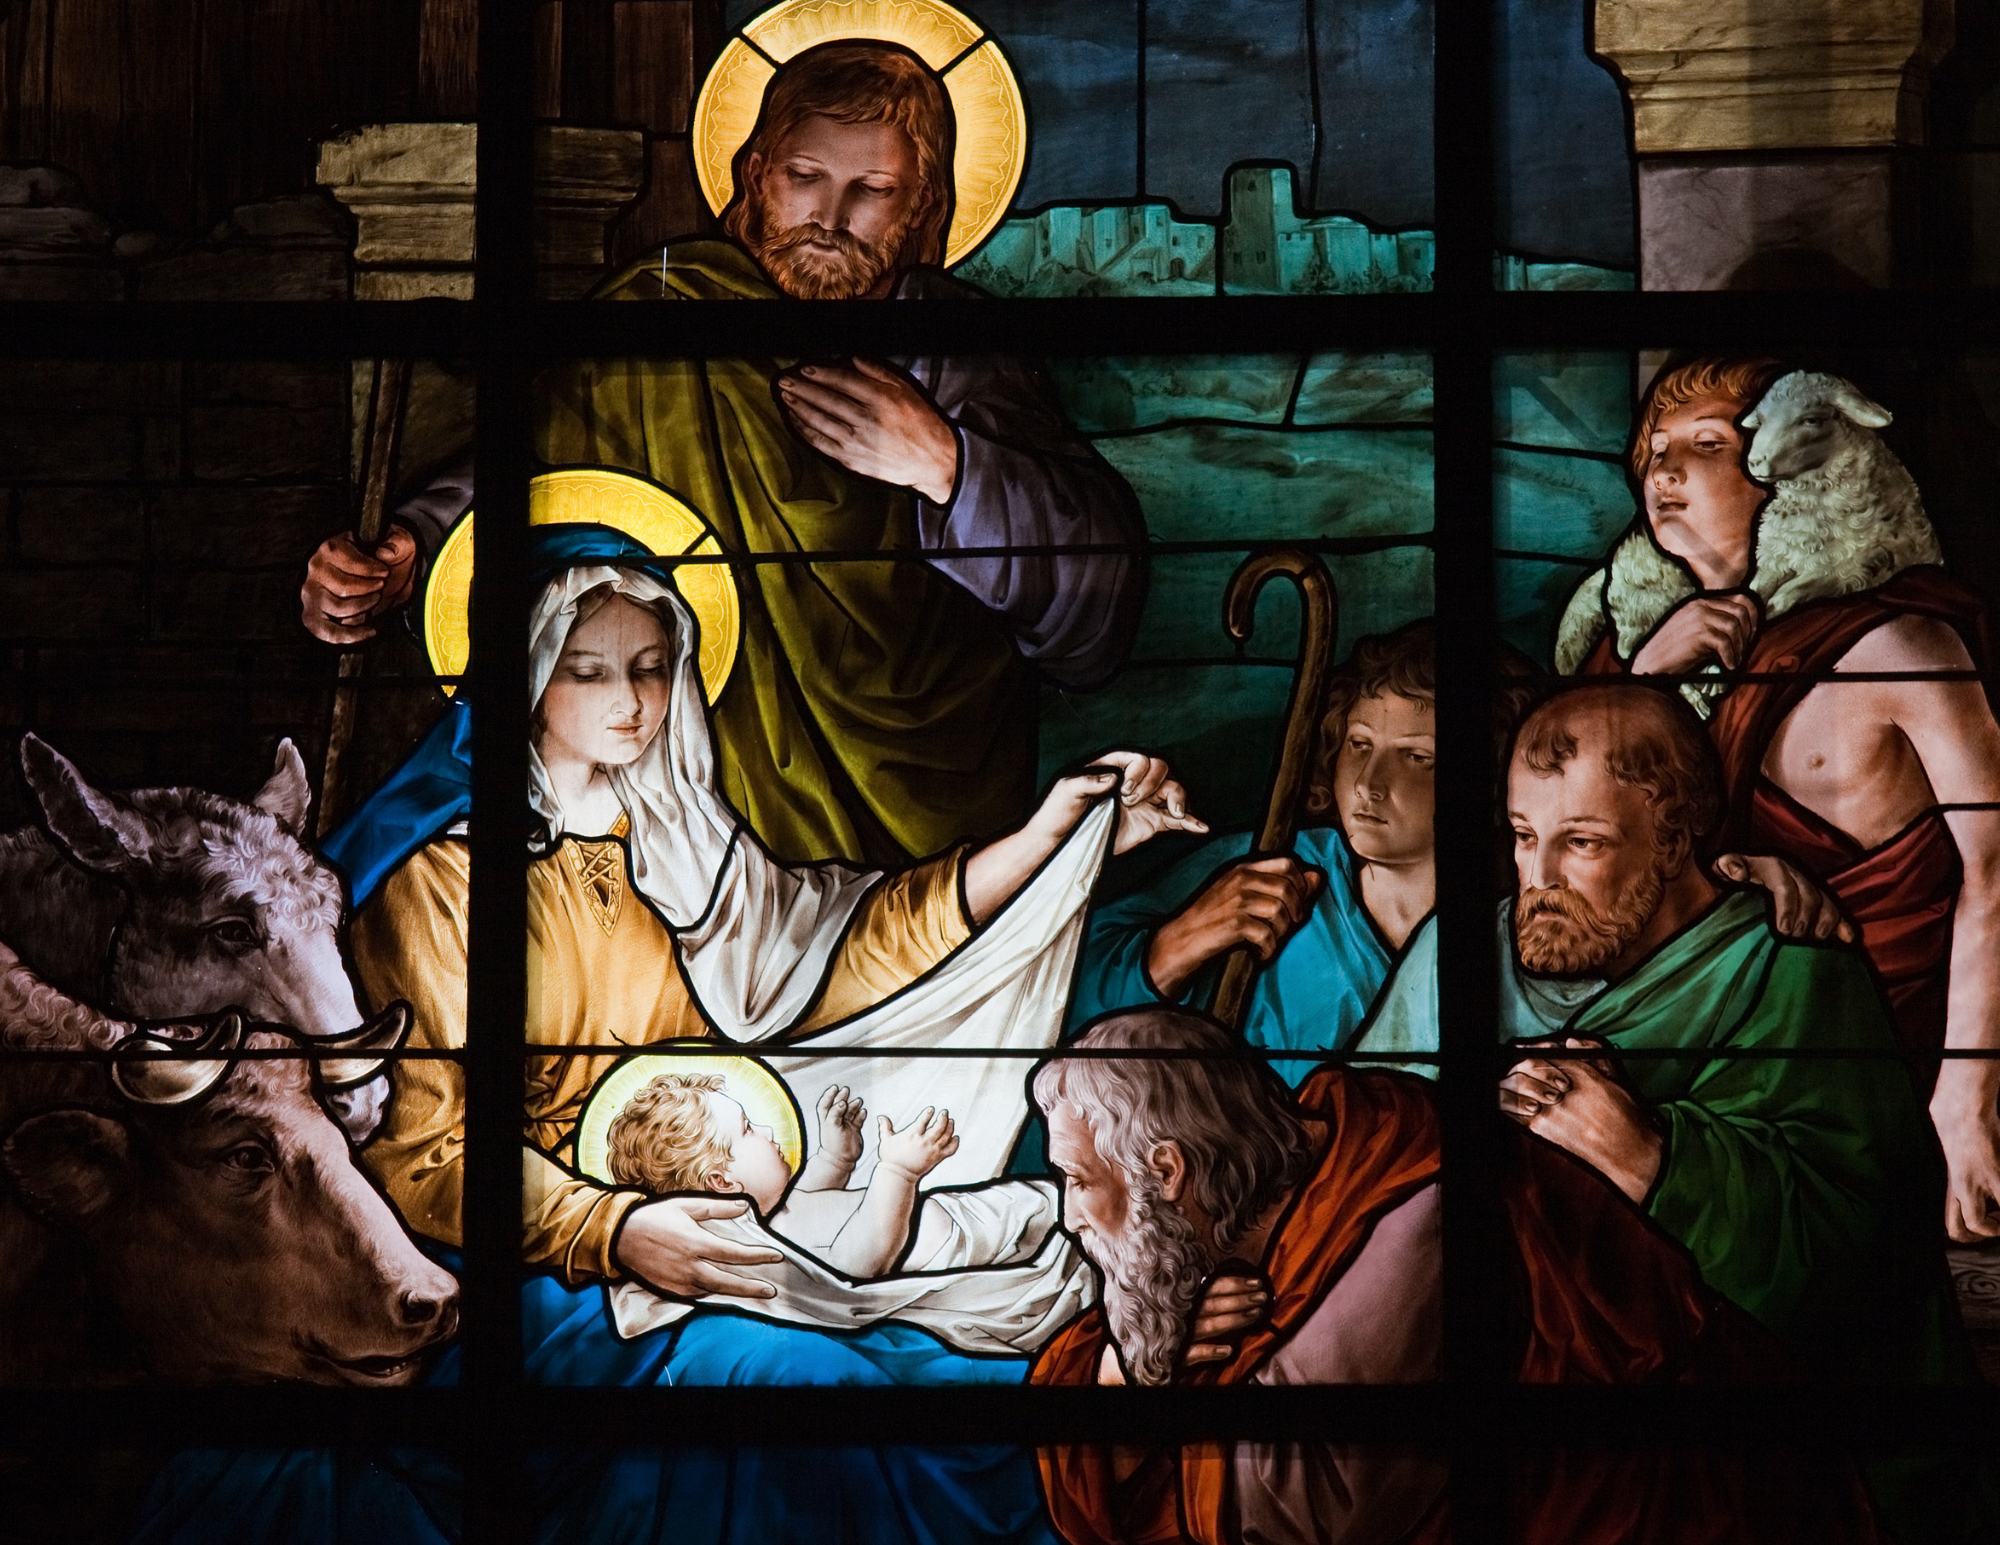 nativity scene in stained glass